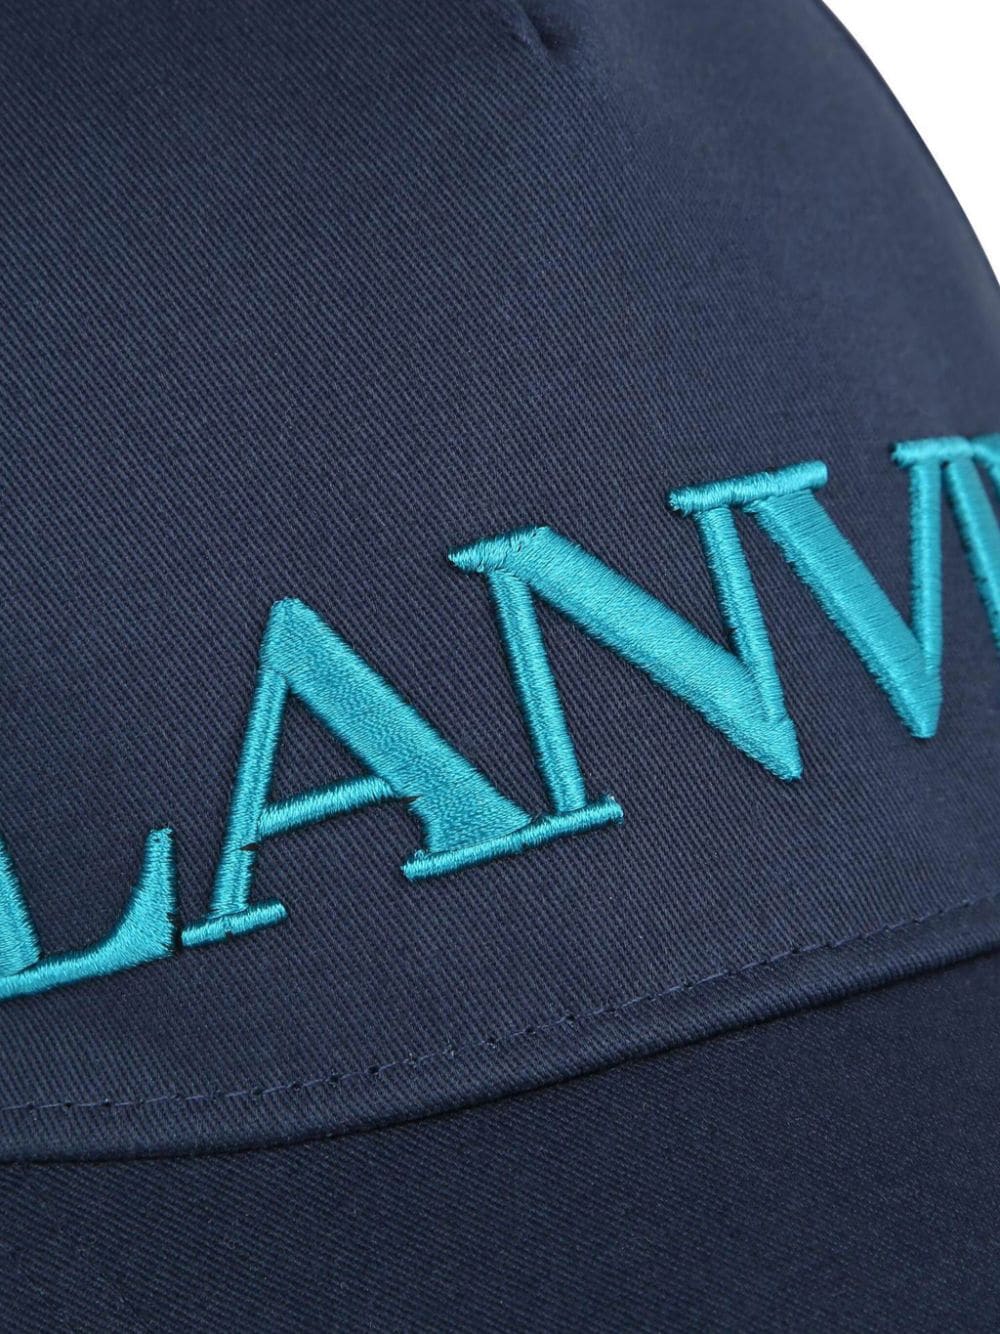 Blue hat for children with logo